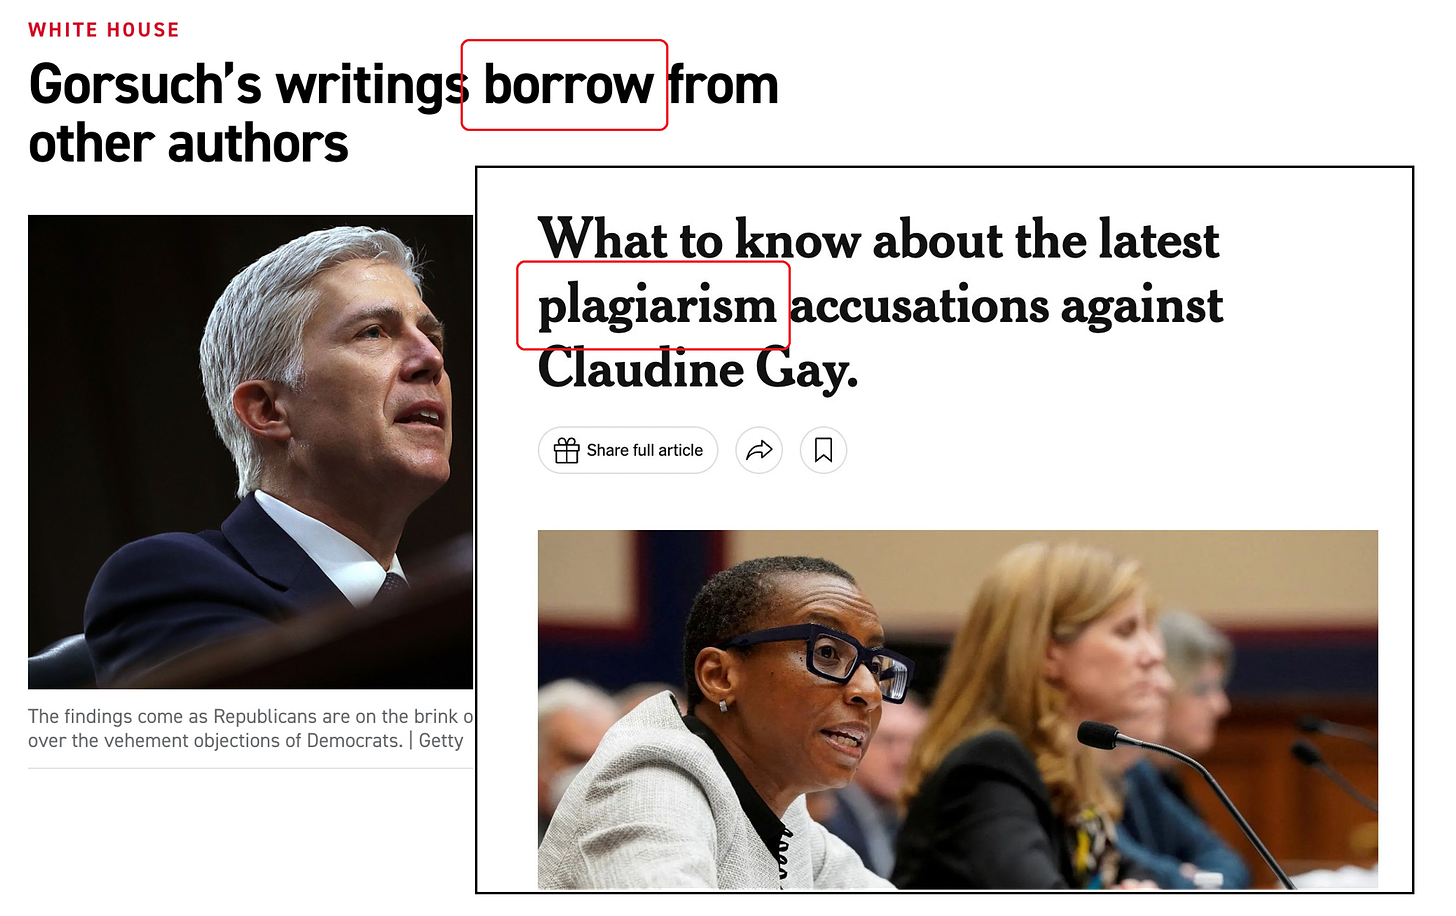 Two headlines, both from Politico. One says "Gorsuch's writings borrow from other authors." The other says "What to know about the latest plagiarism accusations against Claudine Gay."